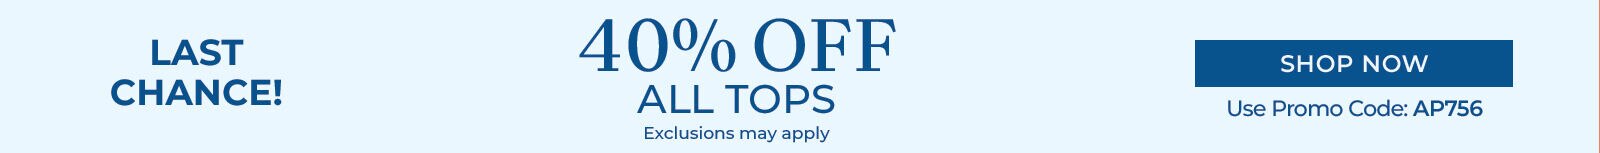 last chance! 40% off all tops exclusions may appl shop now use promo code: AP756